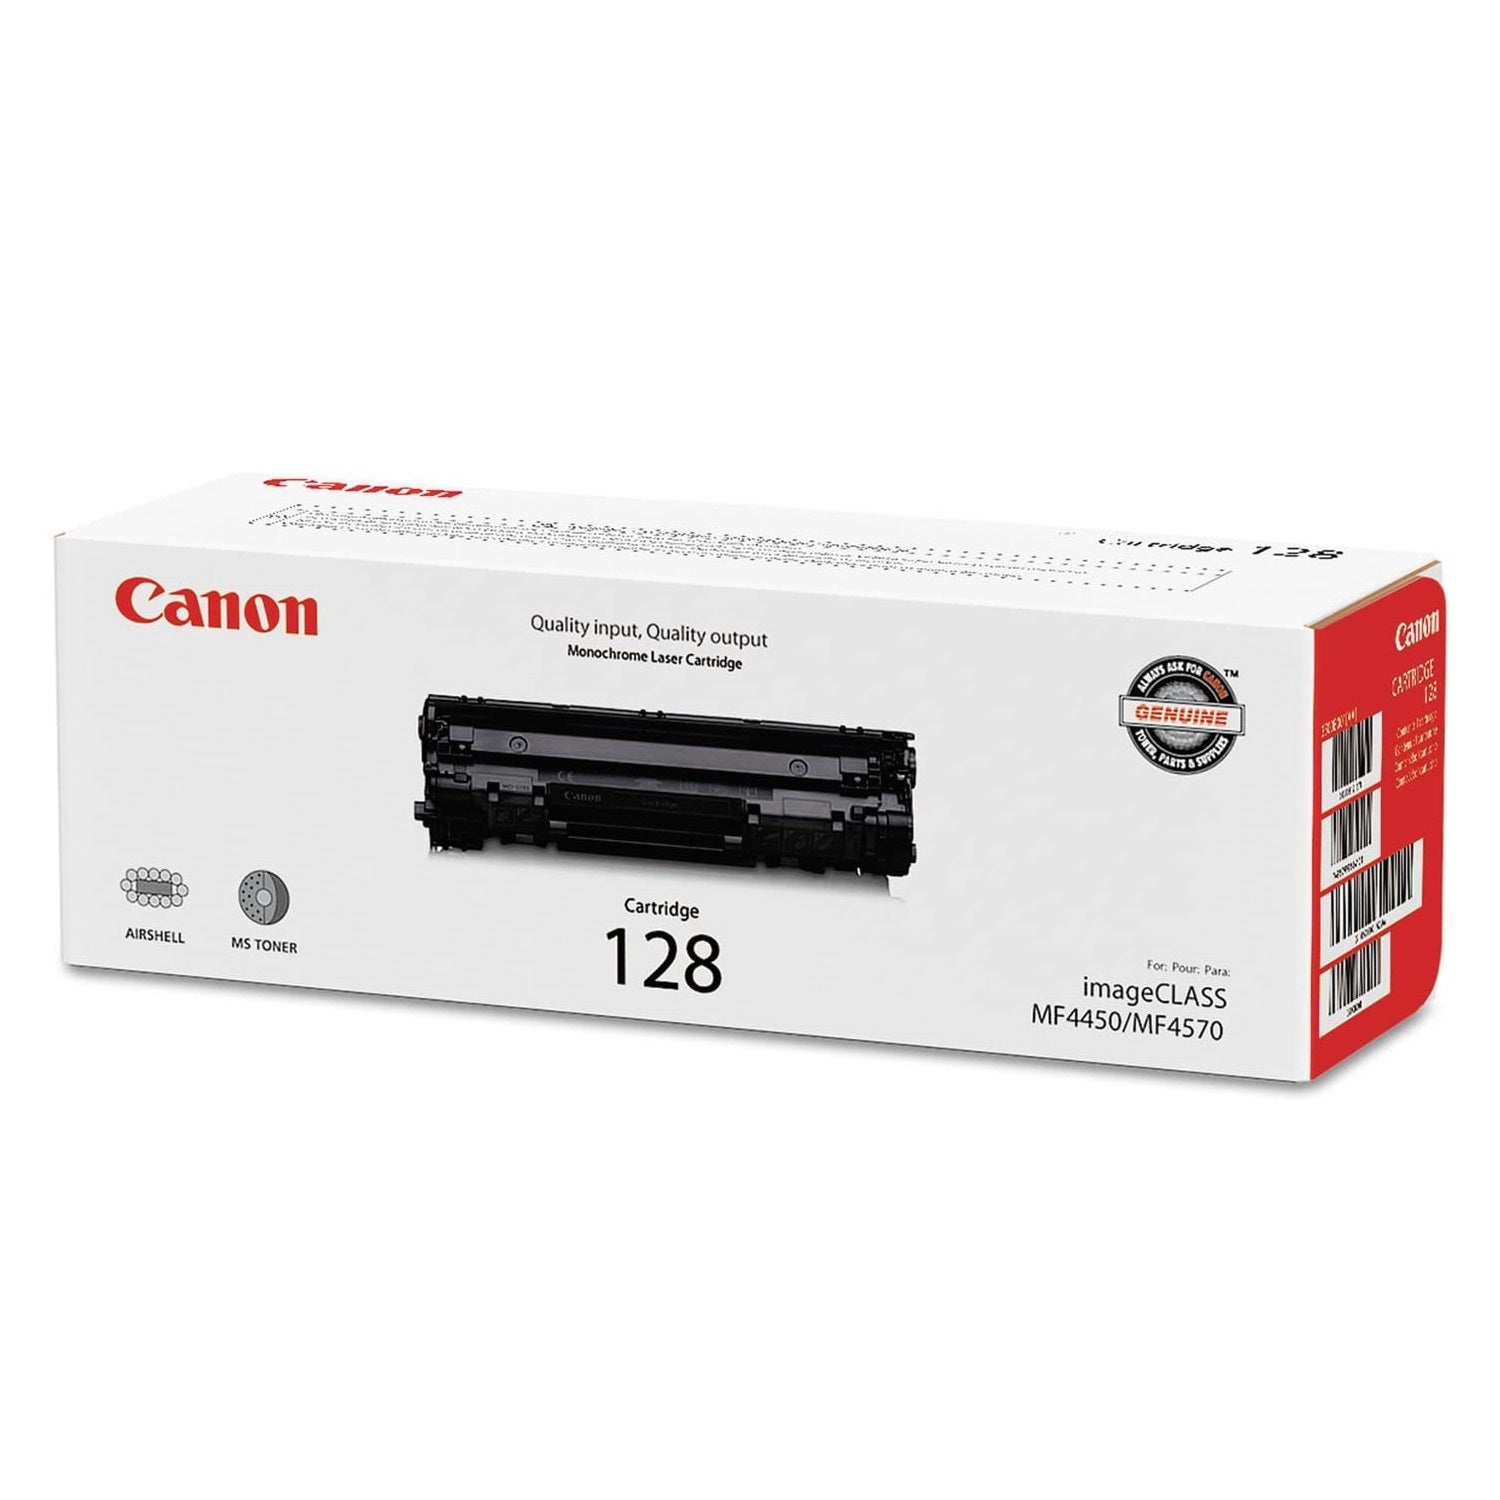 Absolute Toner Canon Genuine OEM 128 (3500B001) Black Yield Toner Cartridge, Yield up to 2100 pages Original Canon Cartridges